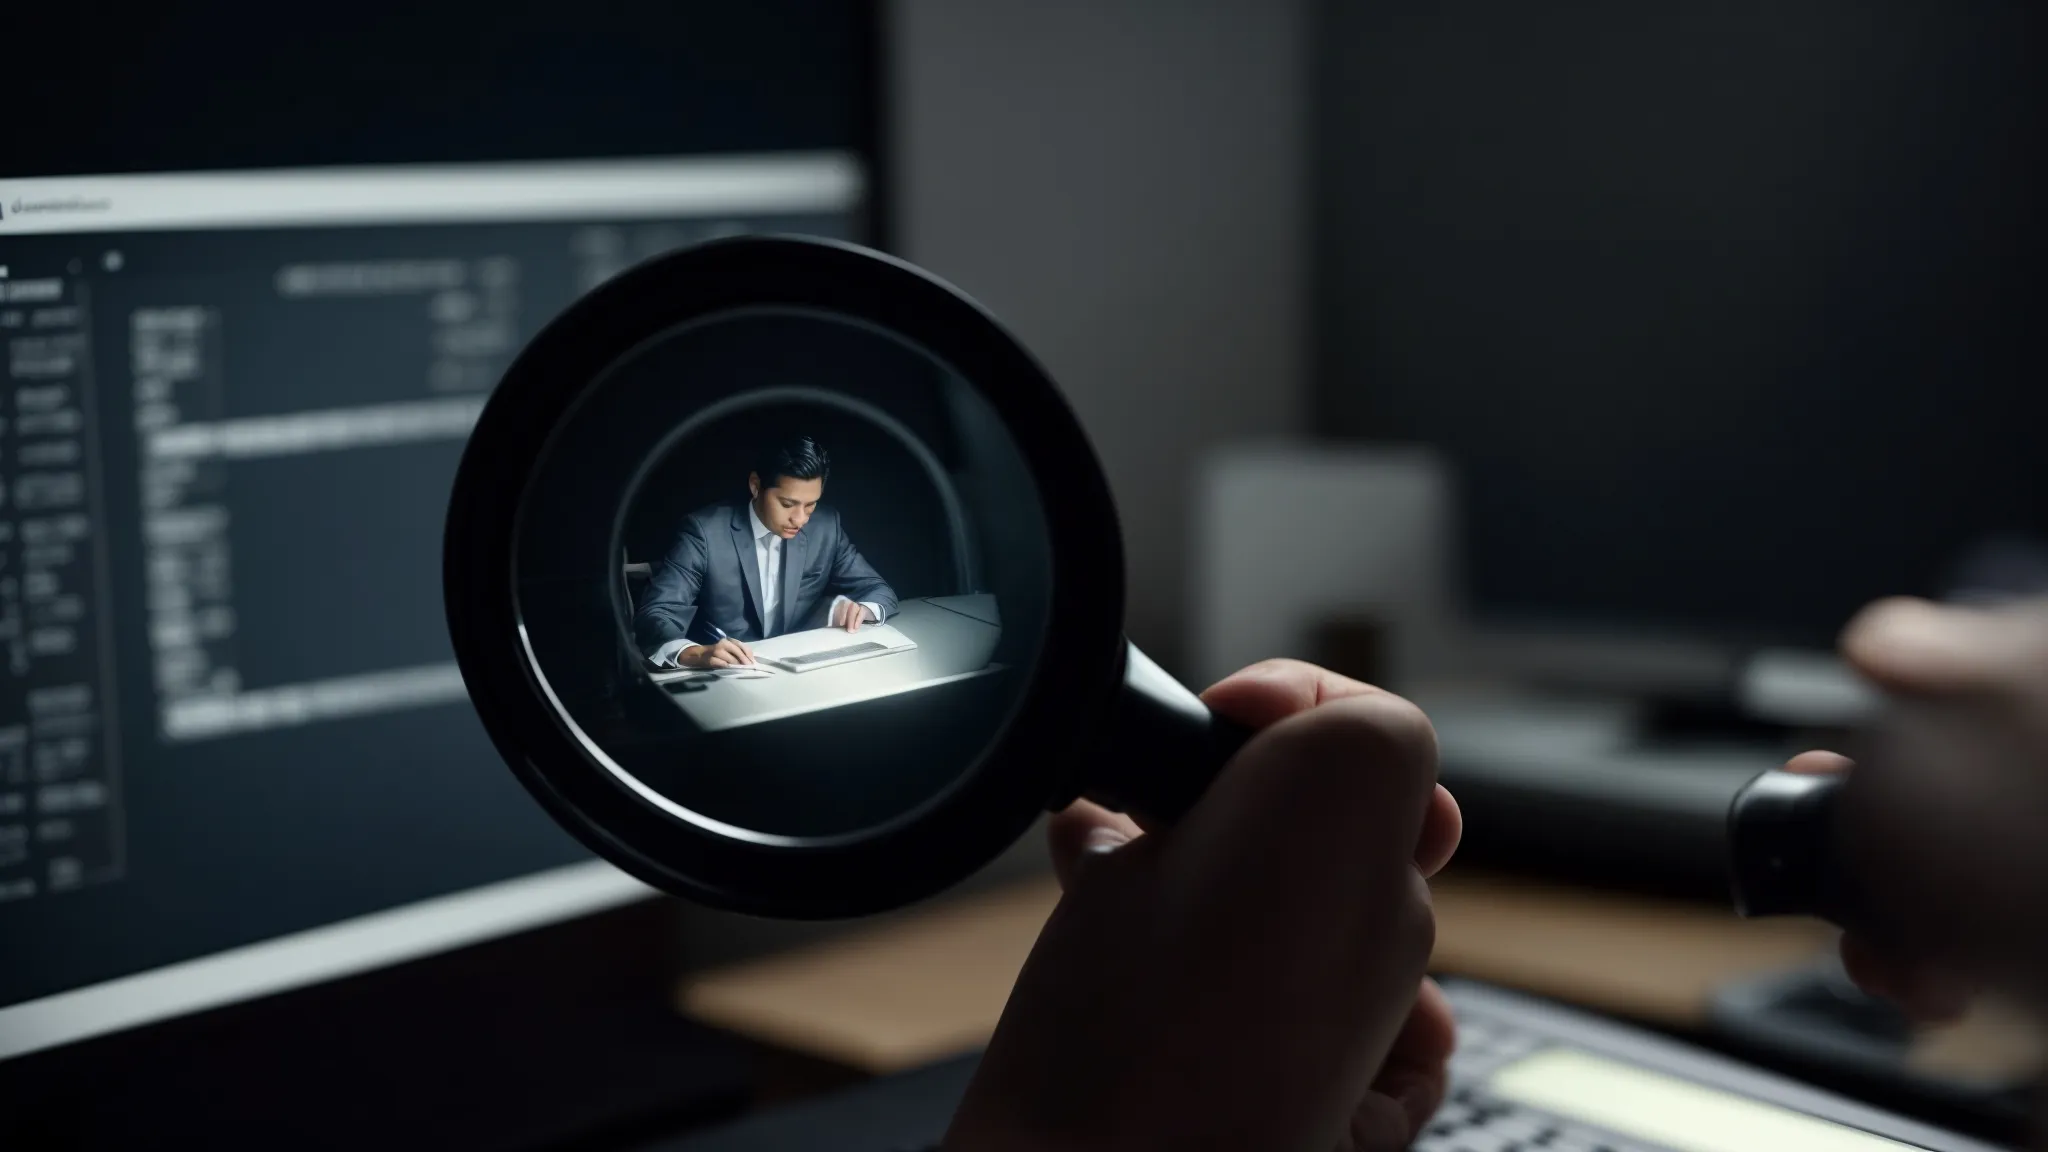 a person seated at a computer clicks on a magnifying glass icon symbolizing the initiation of a targeted online search.